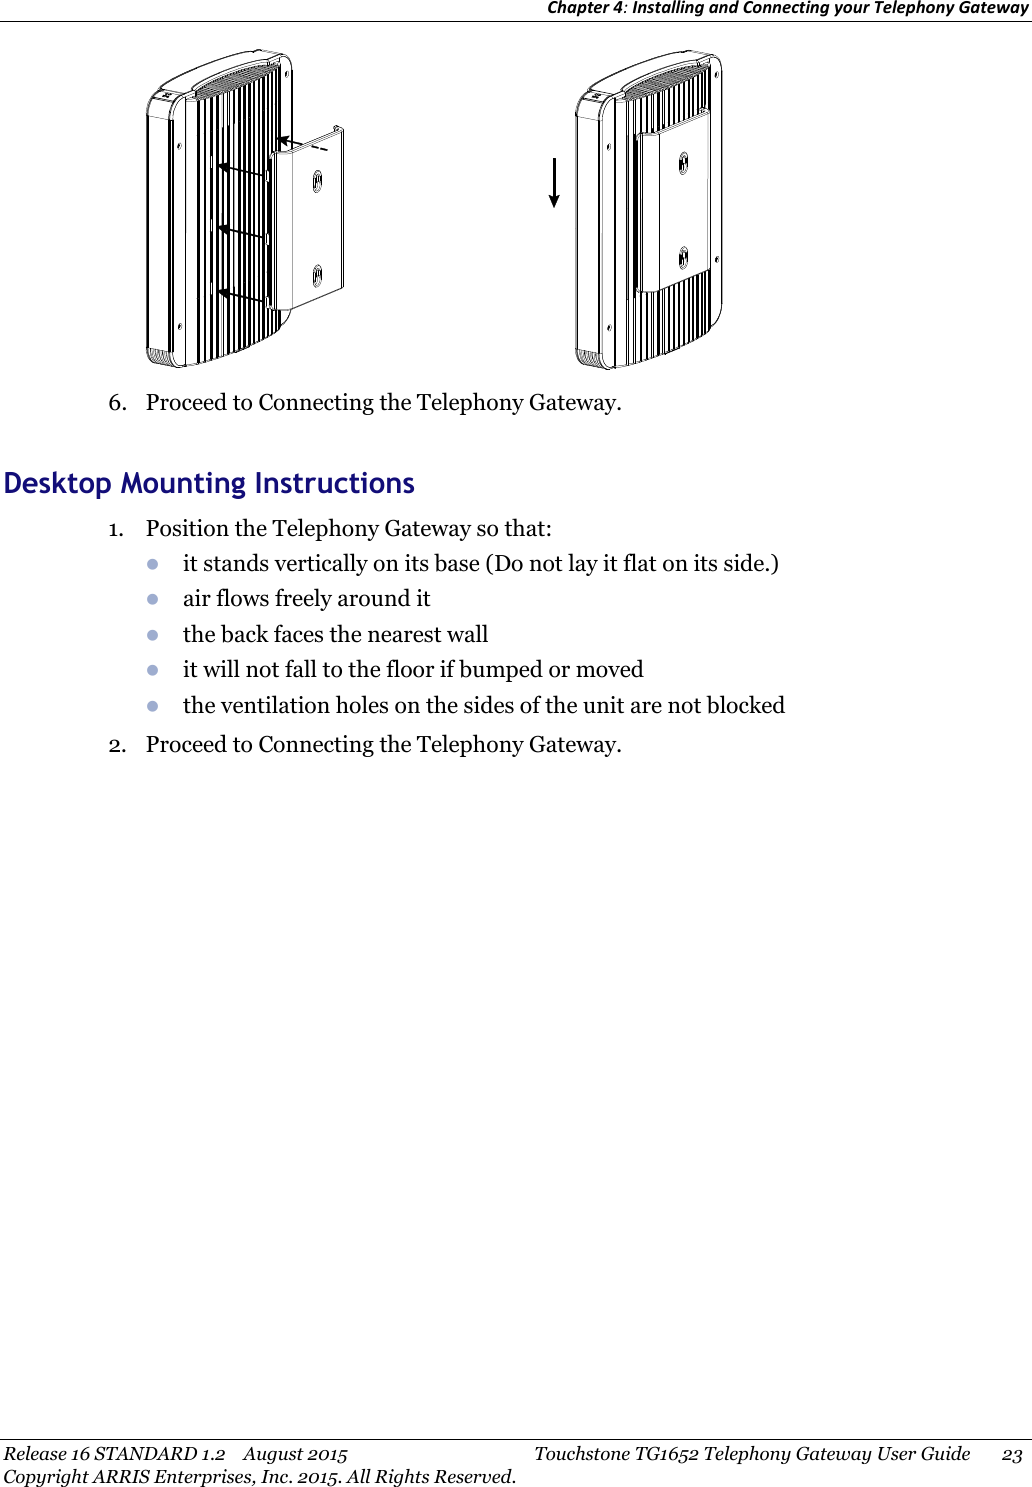 Chapter 4:Installing and Connecting your Telephony GatewayRelease 16 STANDARD 1.2 August 2015 Touchstone TG1652 Telephony Gateway User Guide 23Copyright ARRIS Enterprises, Inc. 2015. All Rights Reserved.6. Proceed to Connecting the Telephony Gateway.Desktop Mounting Instructions1. Position the Telephony Gateway so that:it stands vertically on its base (Do not lay it flat on its side.)air flows freely around itthe back faces the nearest wallit will not fall to the floor if bumped or movedthe ventilation holes on the sides of the unit are not blocked2. Proceed to Connecting the Telephony Gateway.